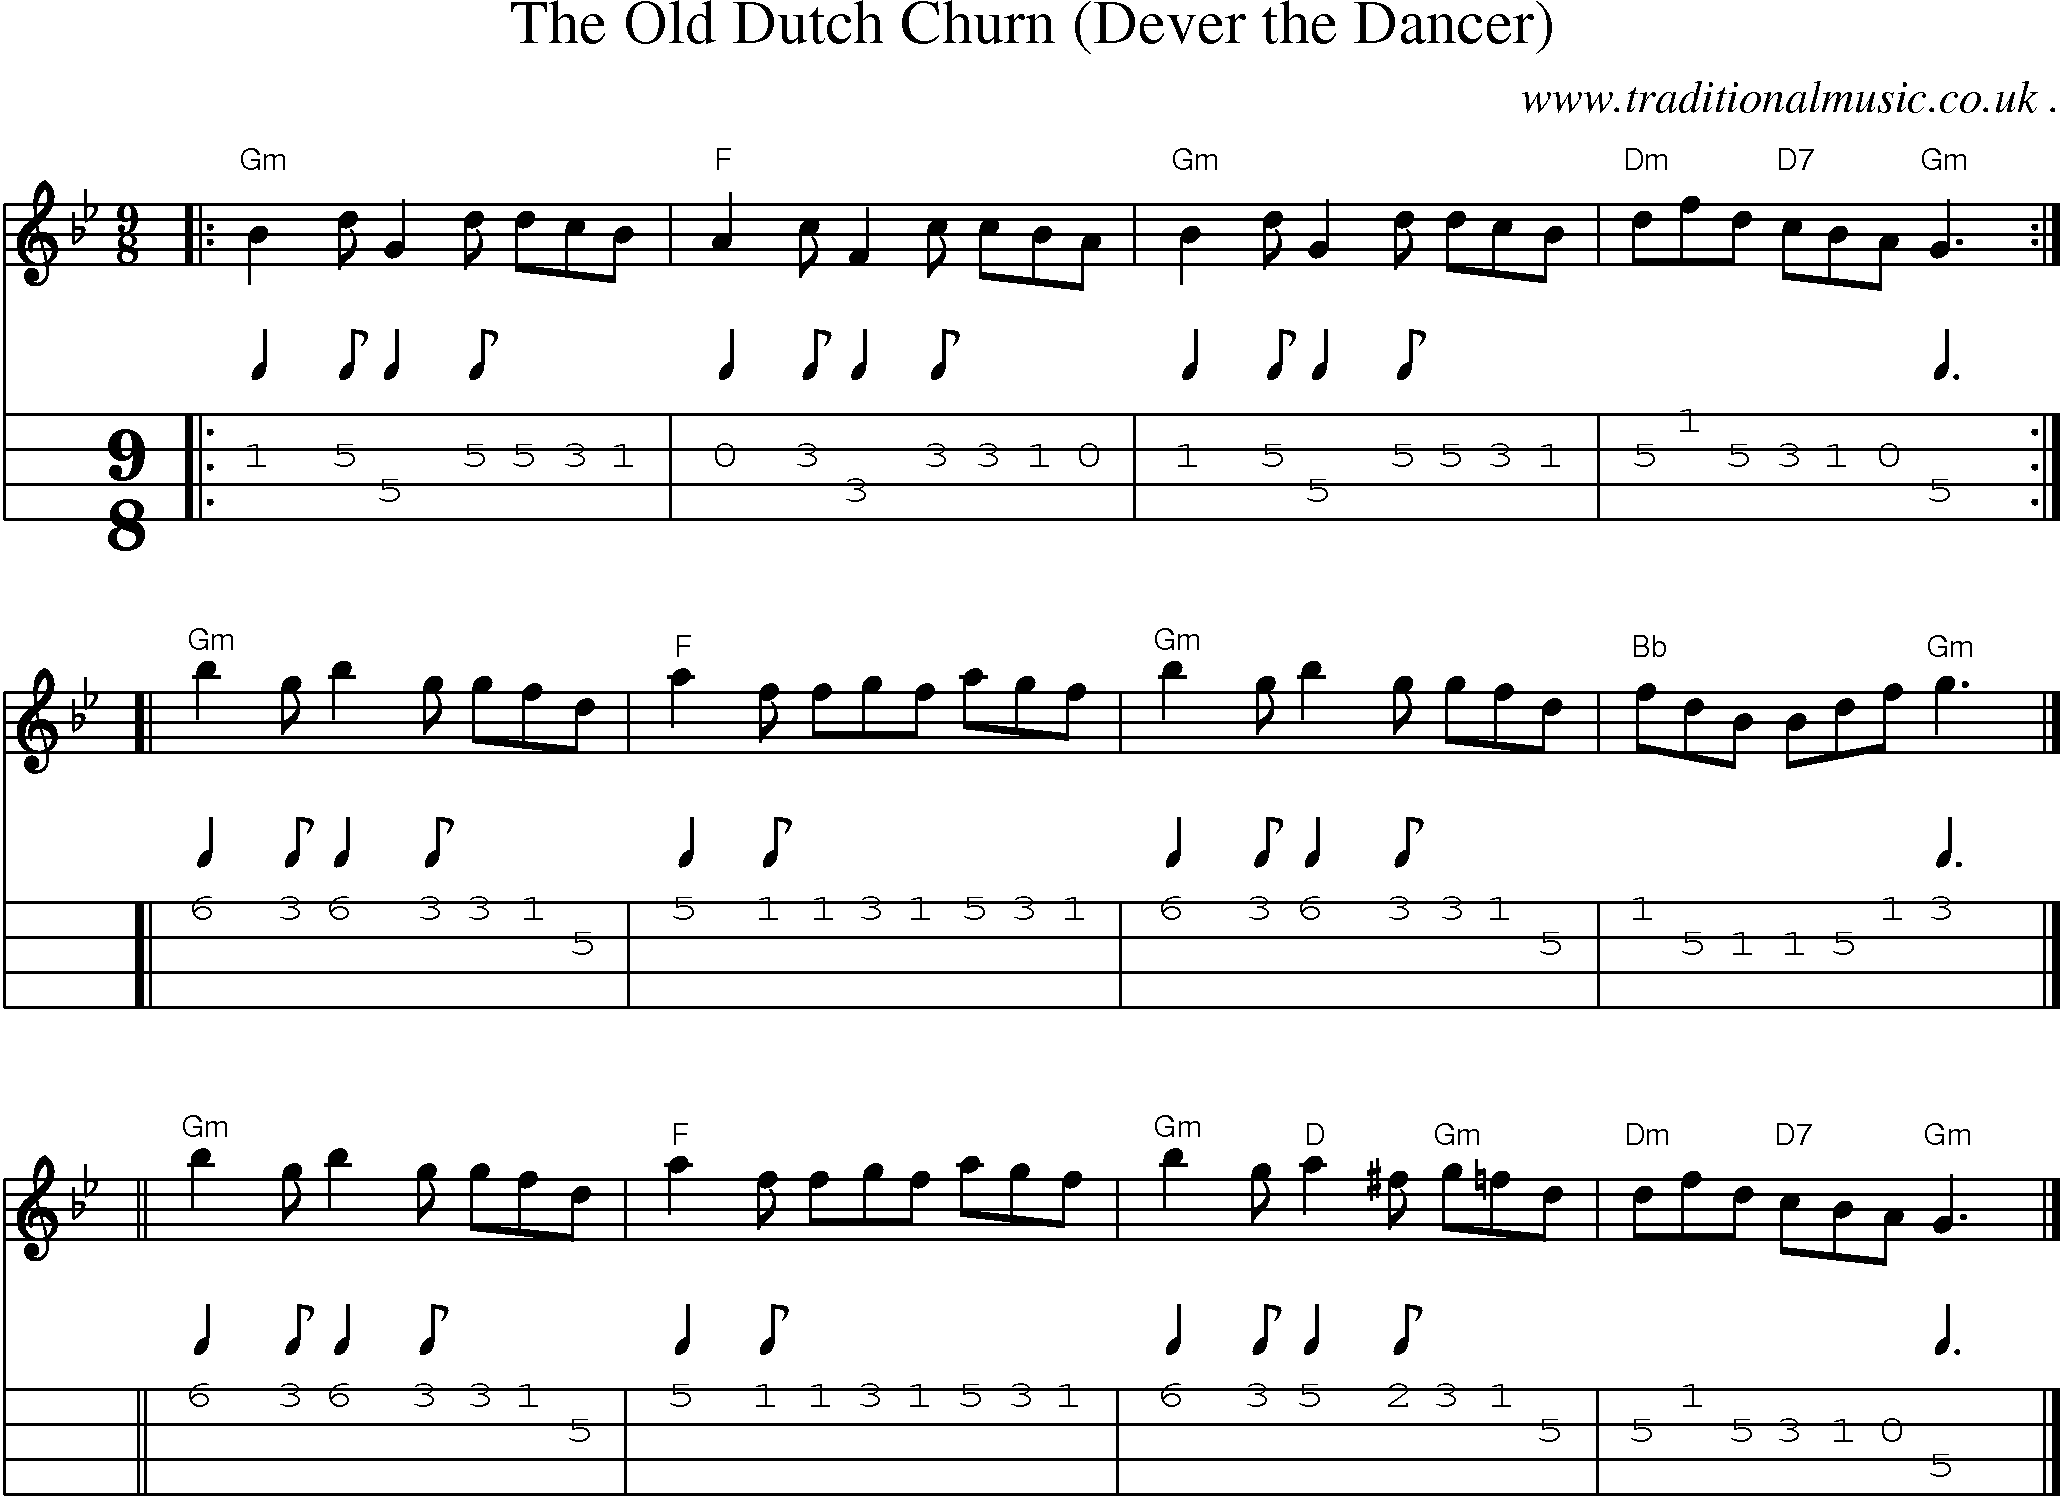 Sheet-music  score, Chords and Mandolin Tabs for The Old Dutch Churn Dever The Dancer